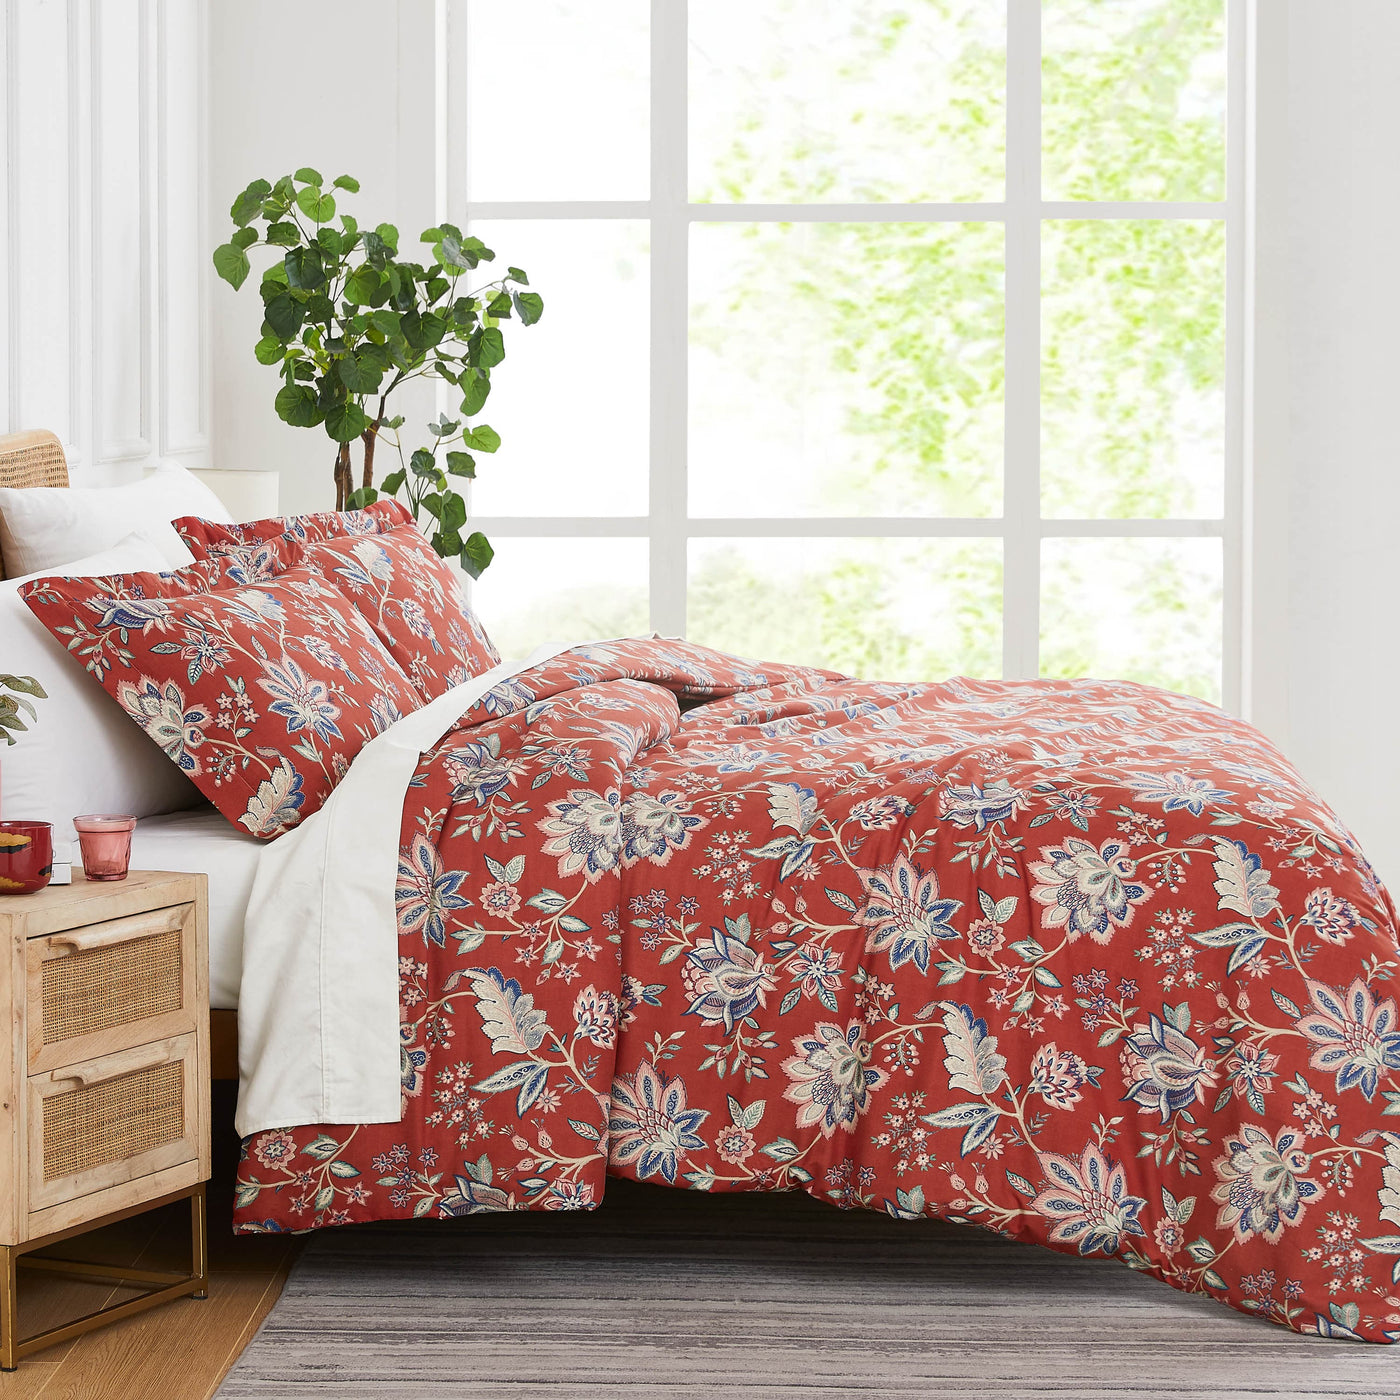 Side View of Jacobean Willow Duvet Cover Set in Red #color_jacobean-willow-red